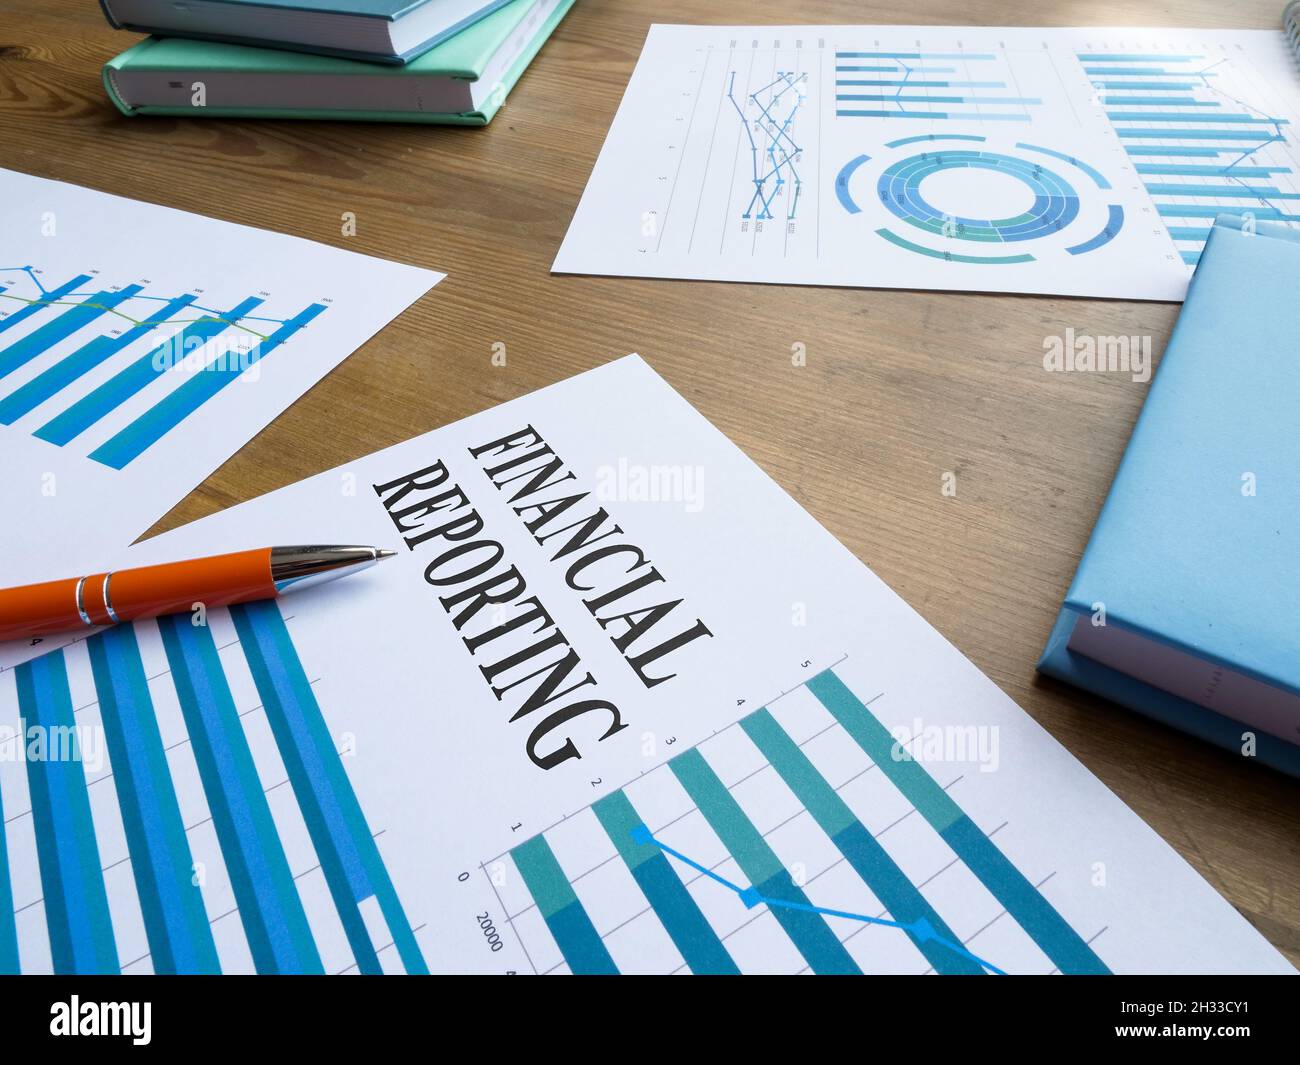 Financial reporting and business papers with charts. Stock Photo